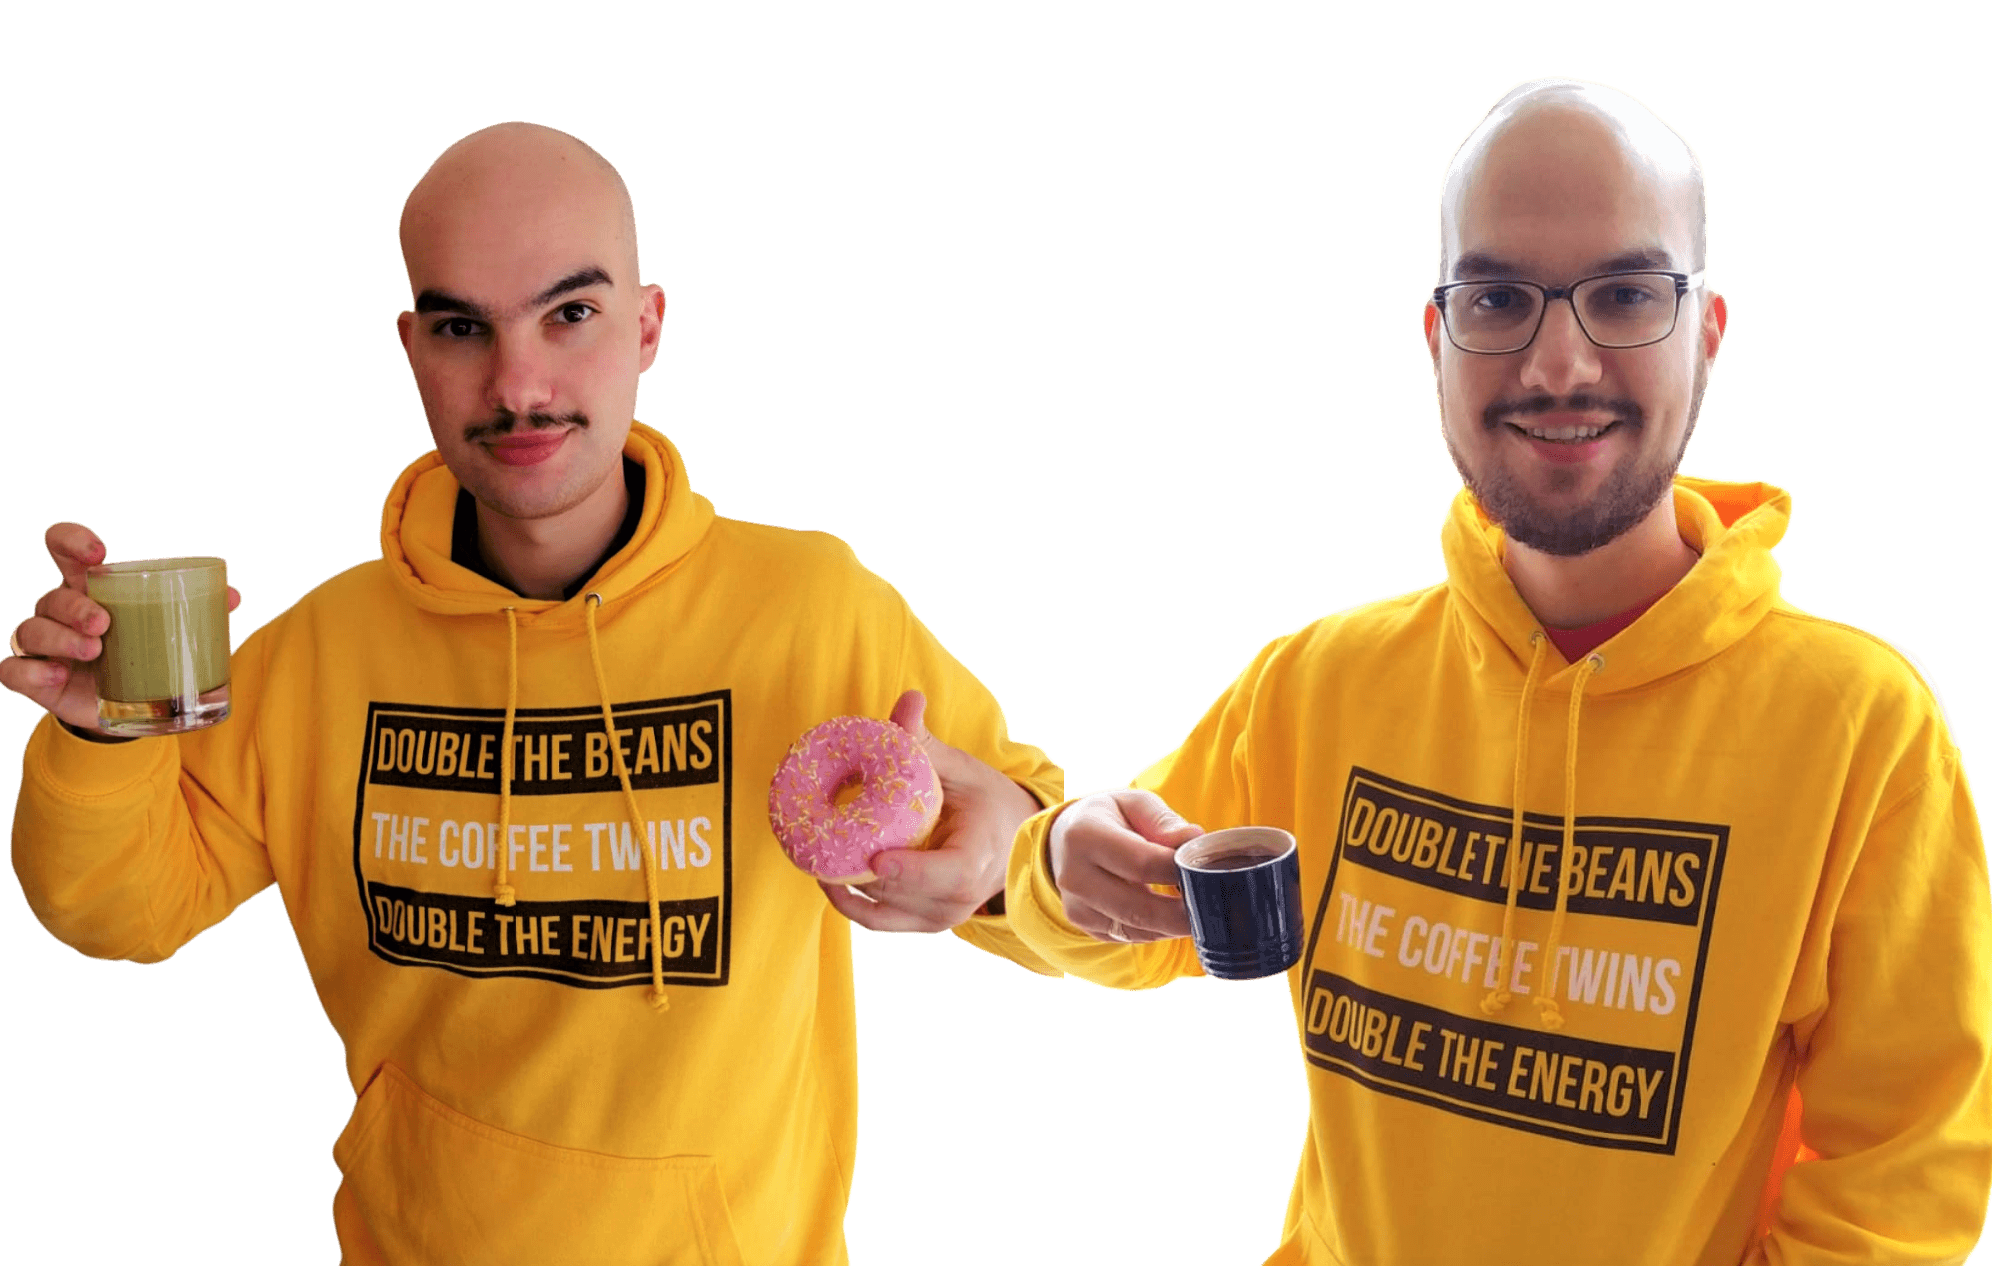 The coffee twins brothers